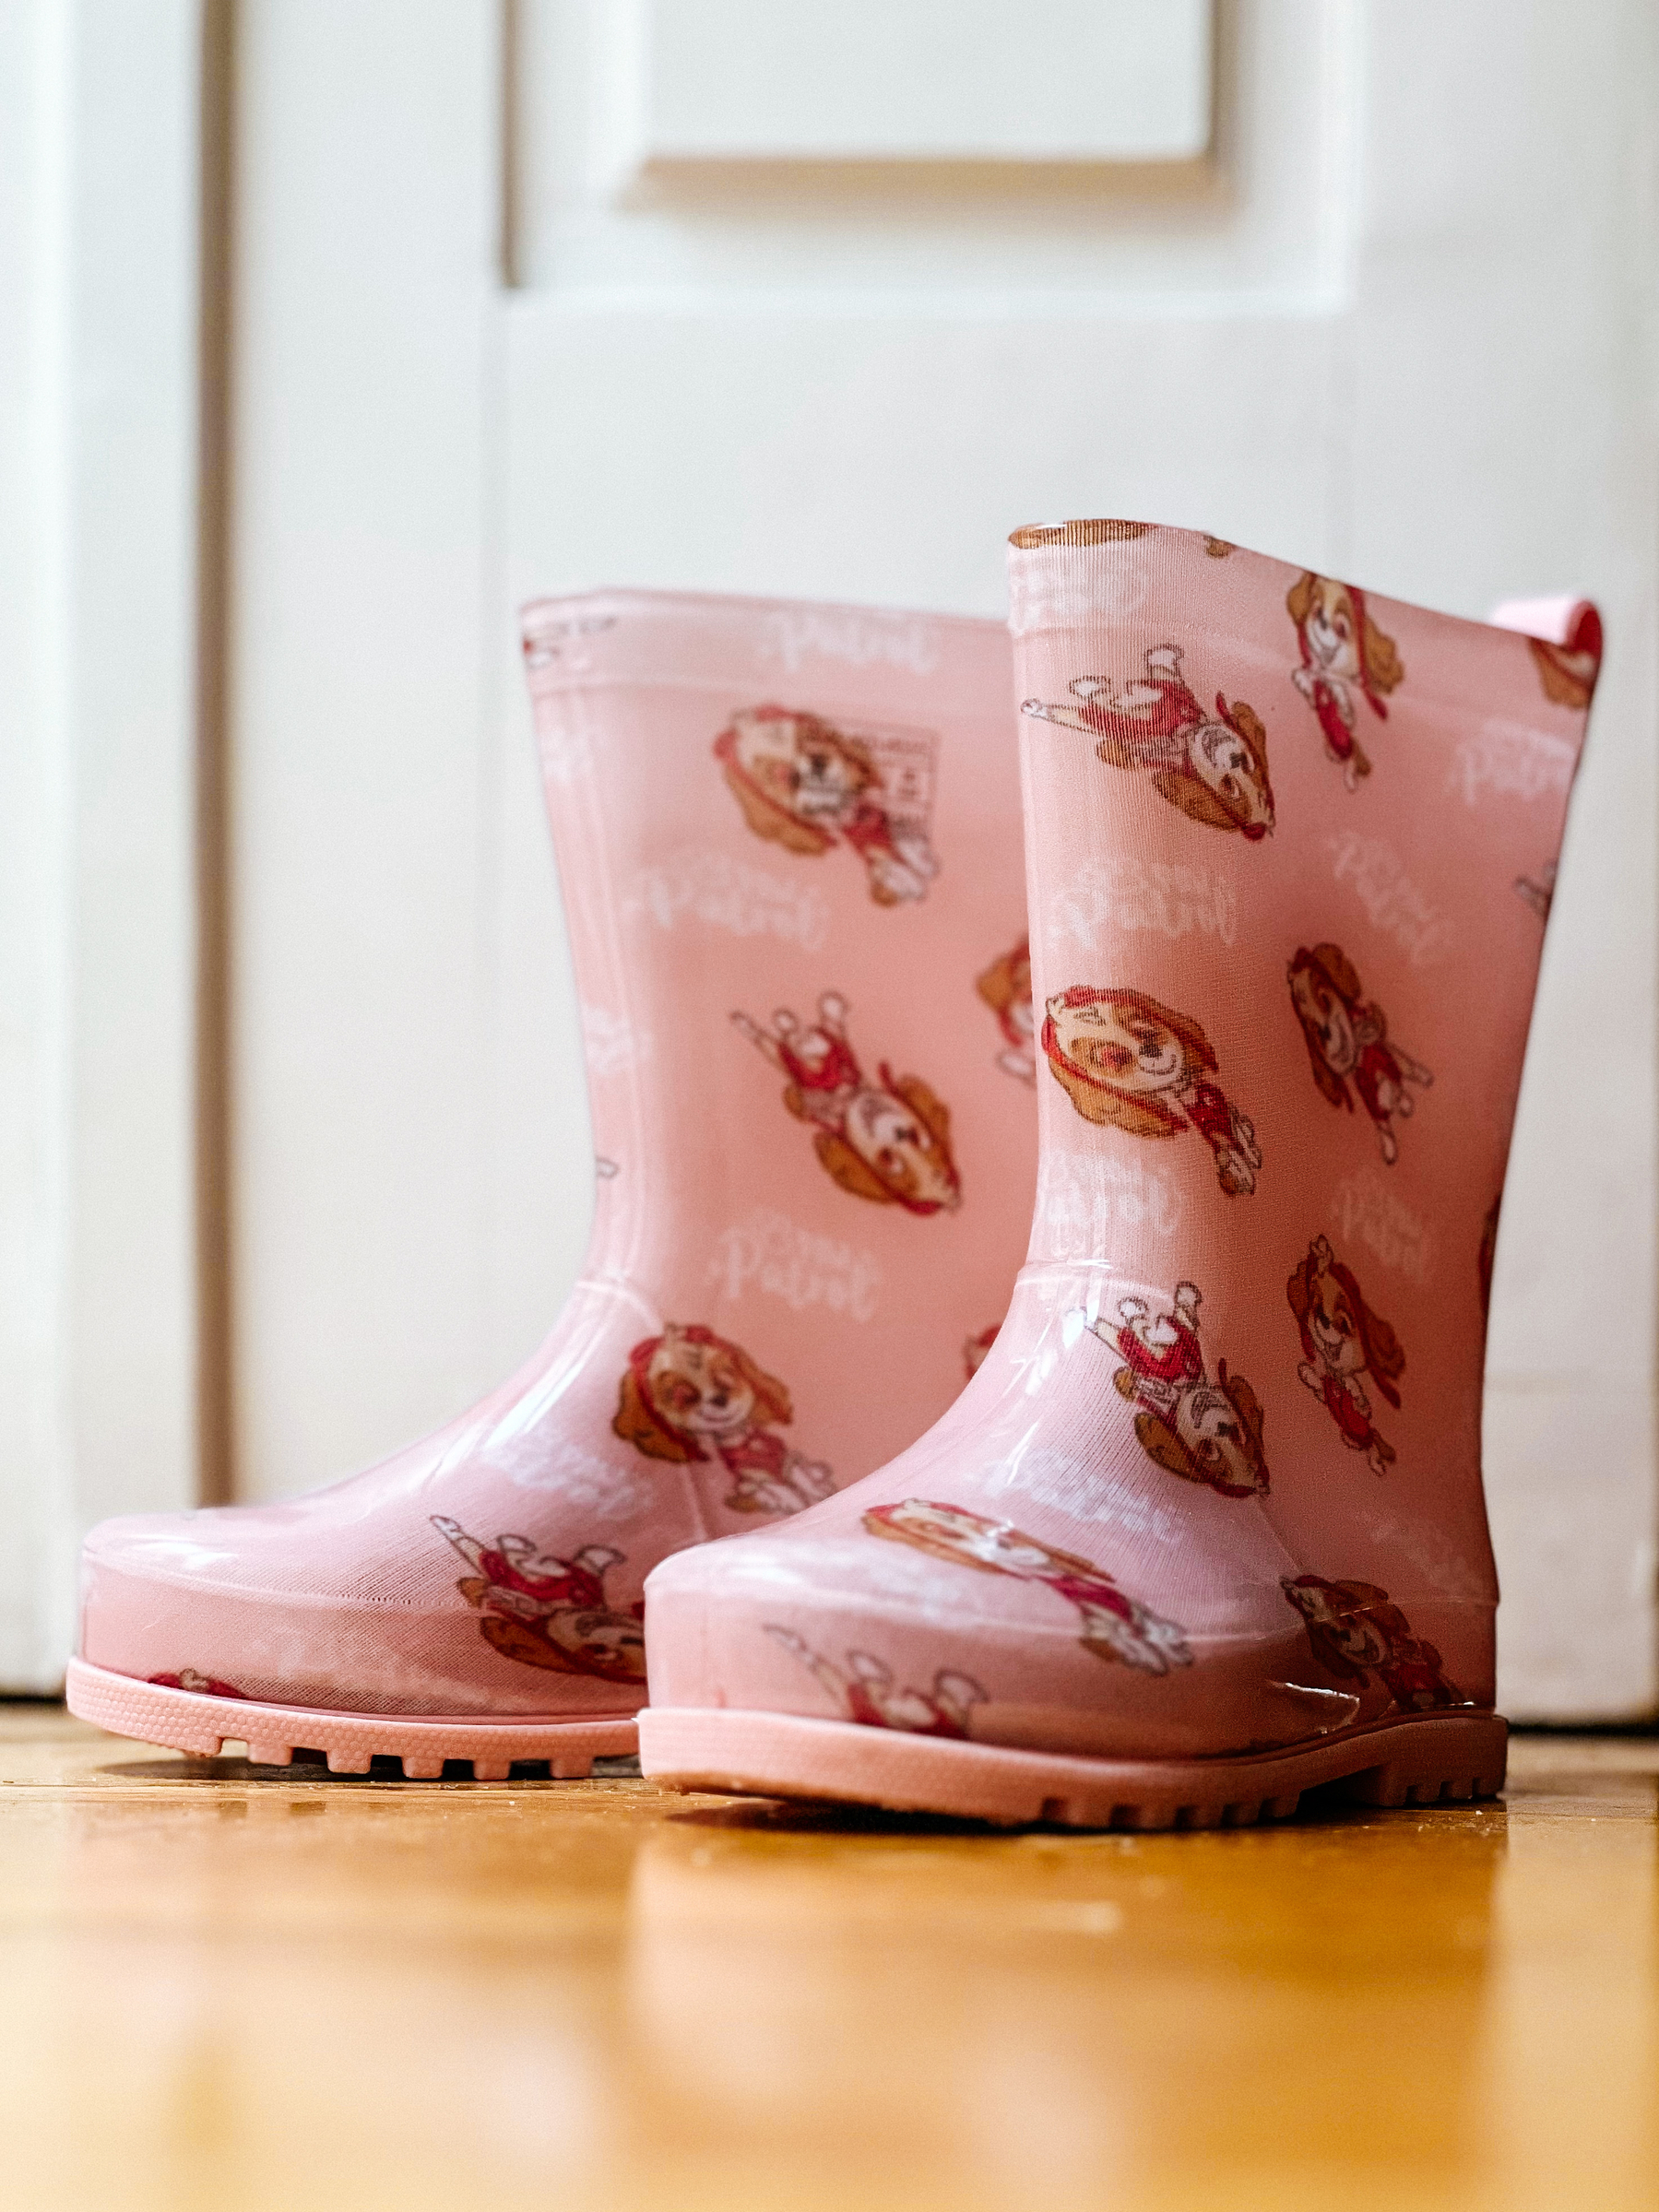 pink rain boots, with Skye from Paw Patrol printed on them